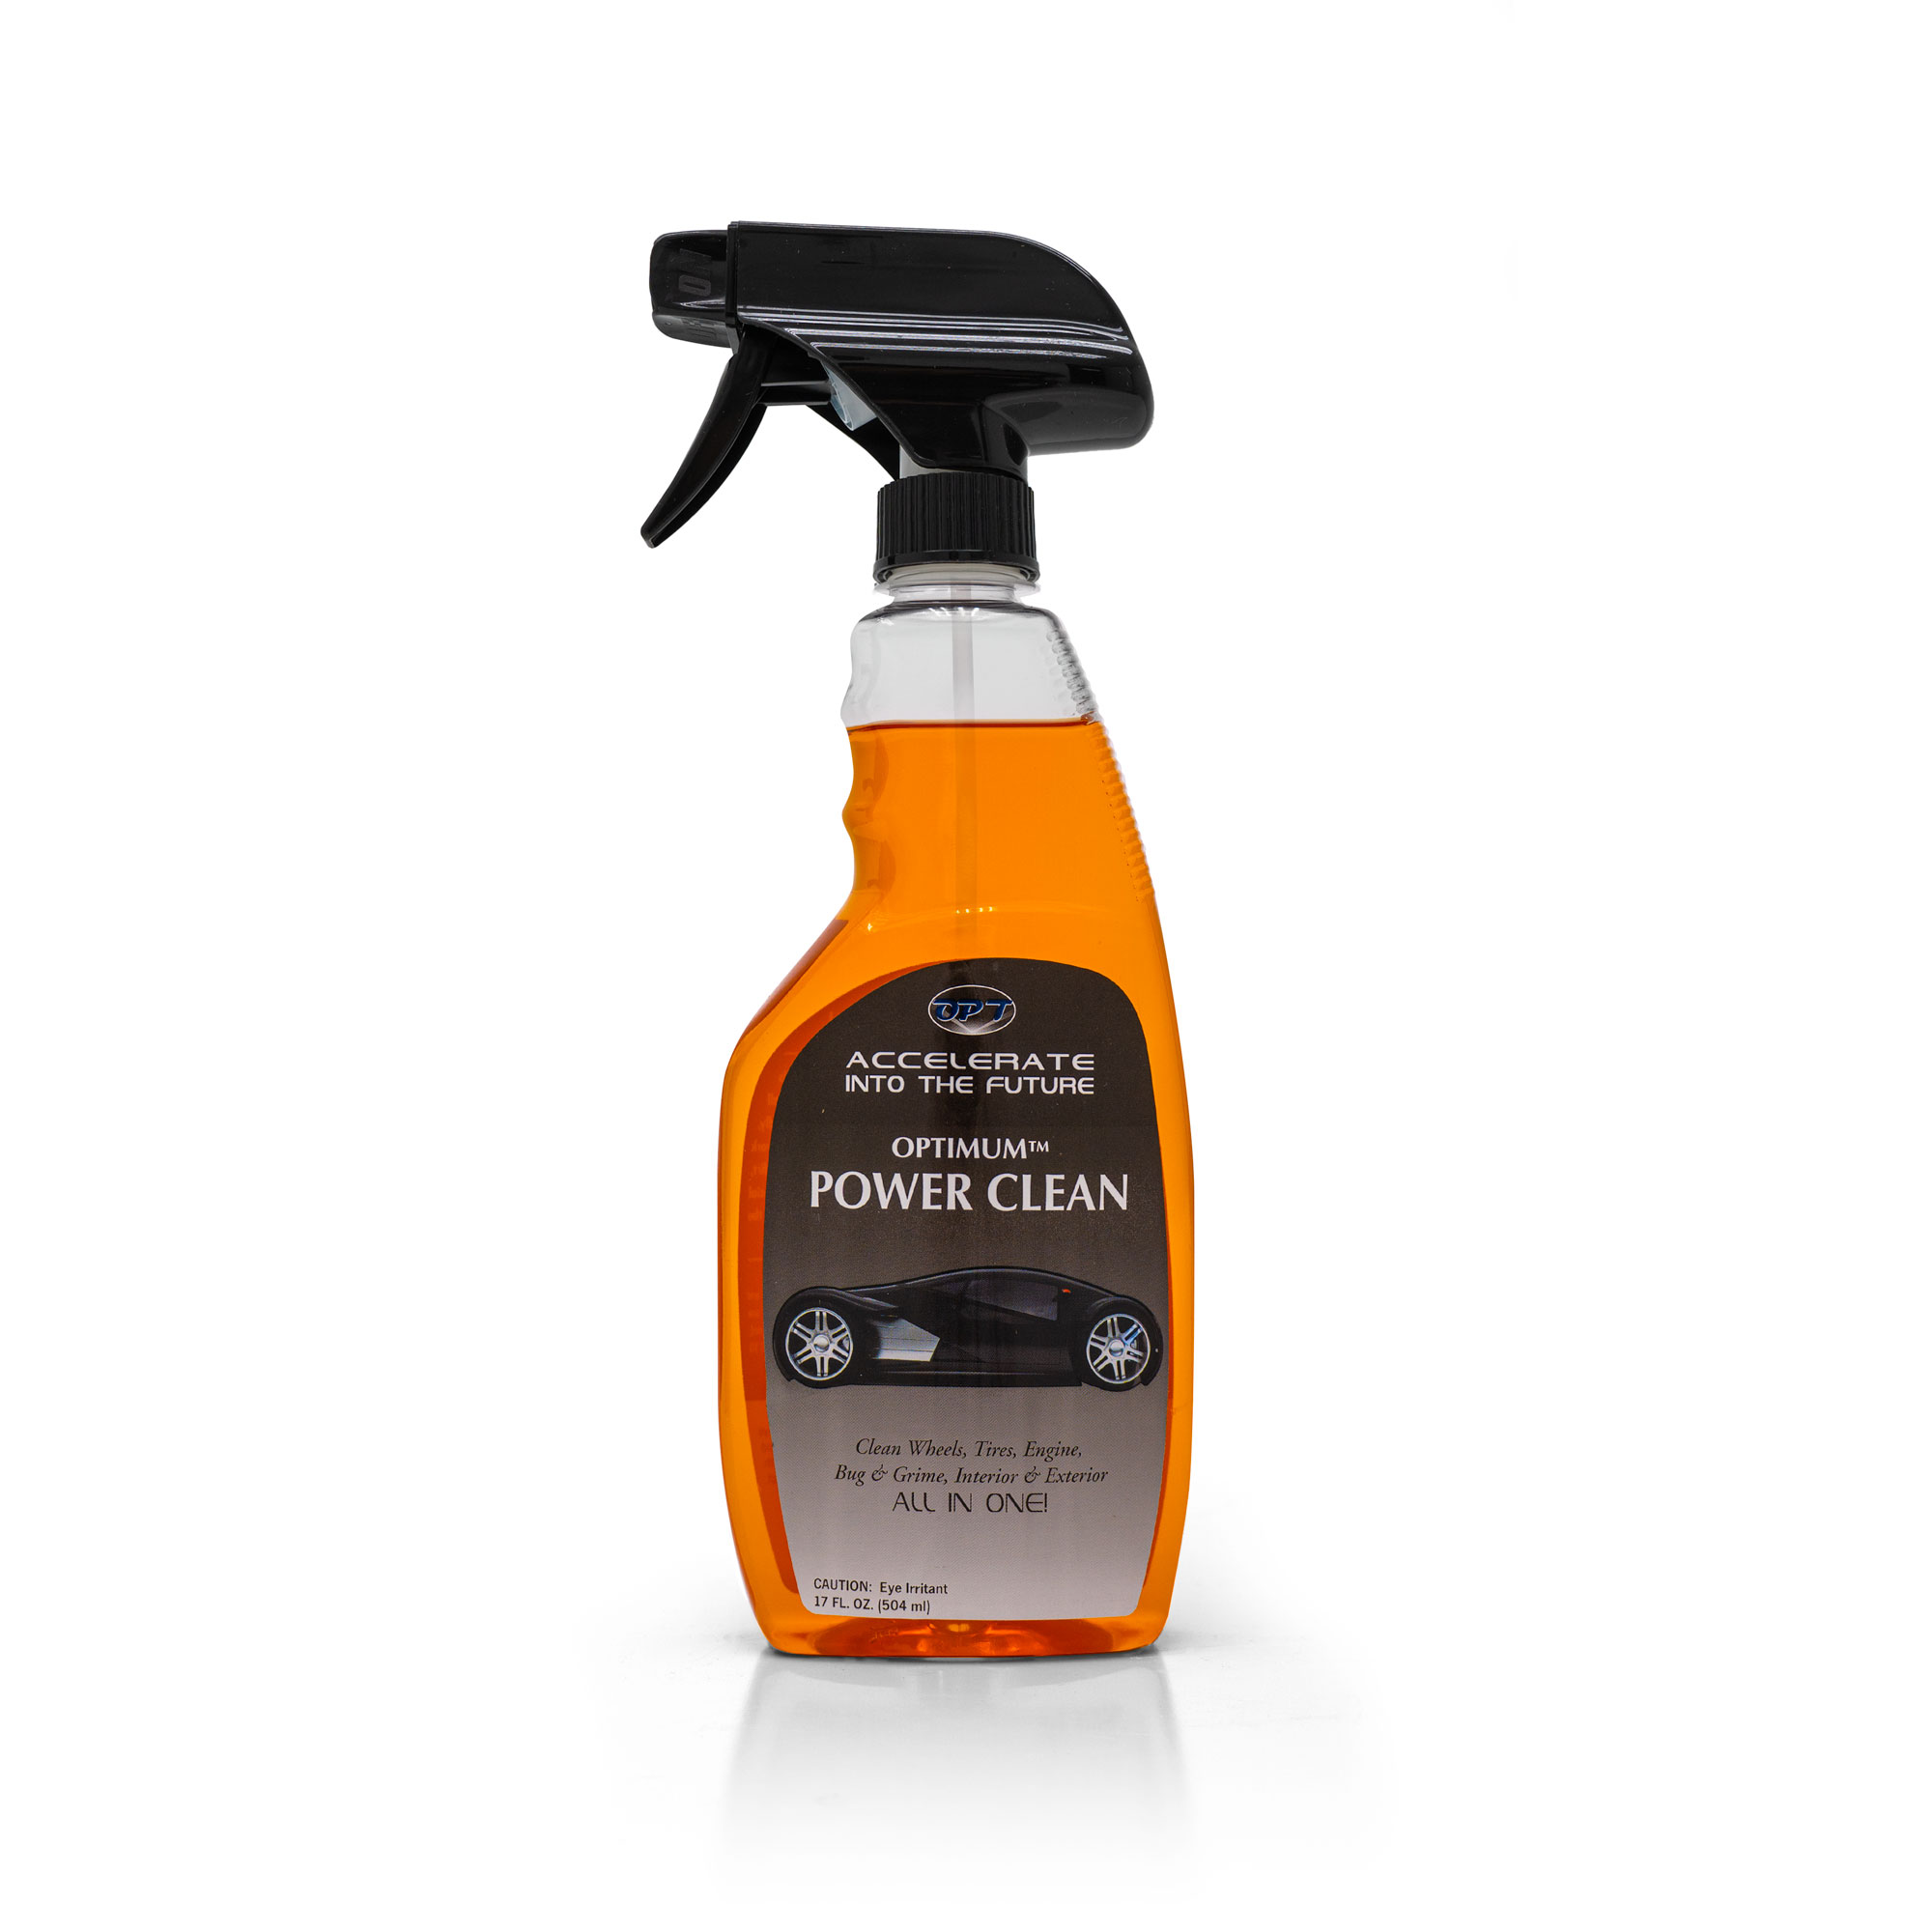 Unbranded Spray Surface Cleaner Household Cleaning Products